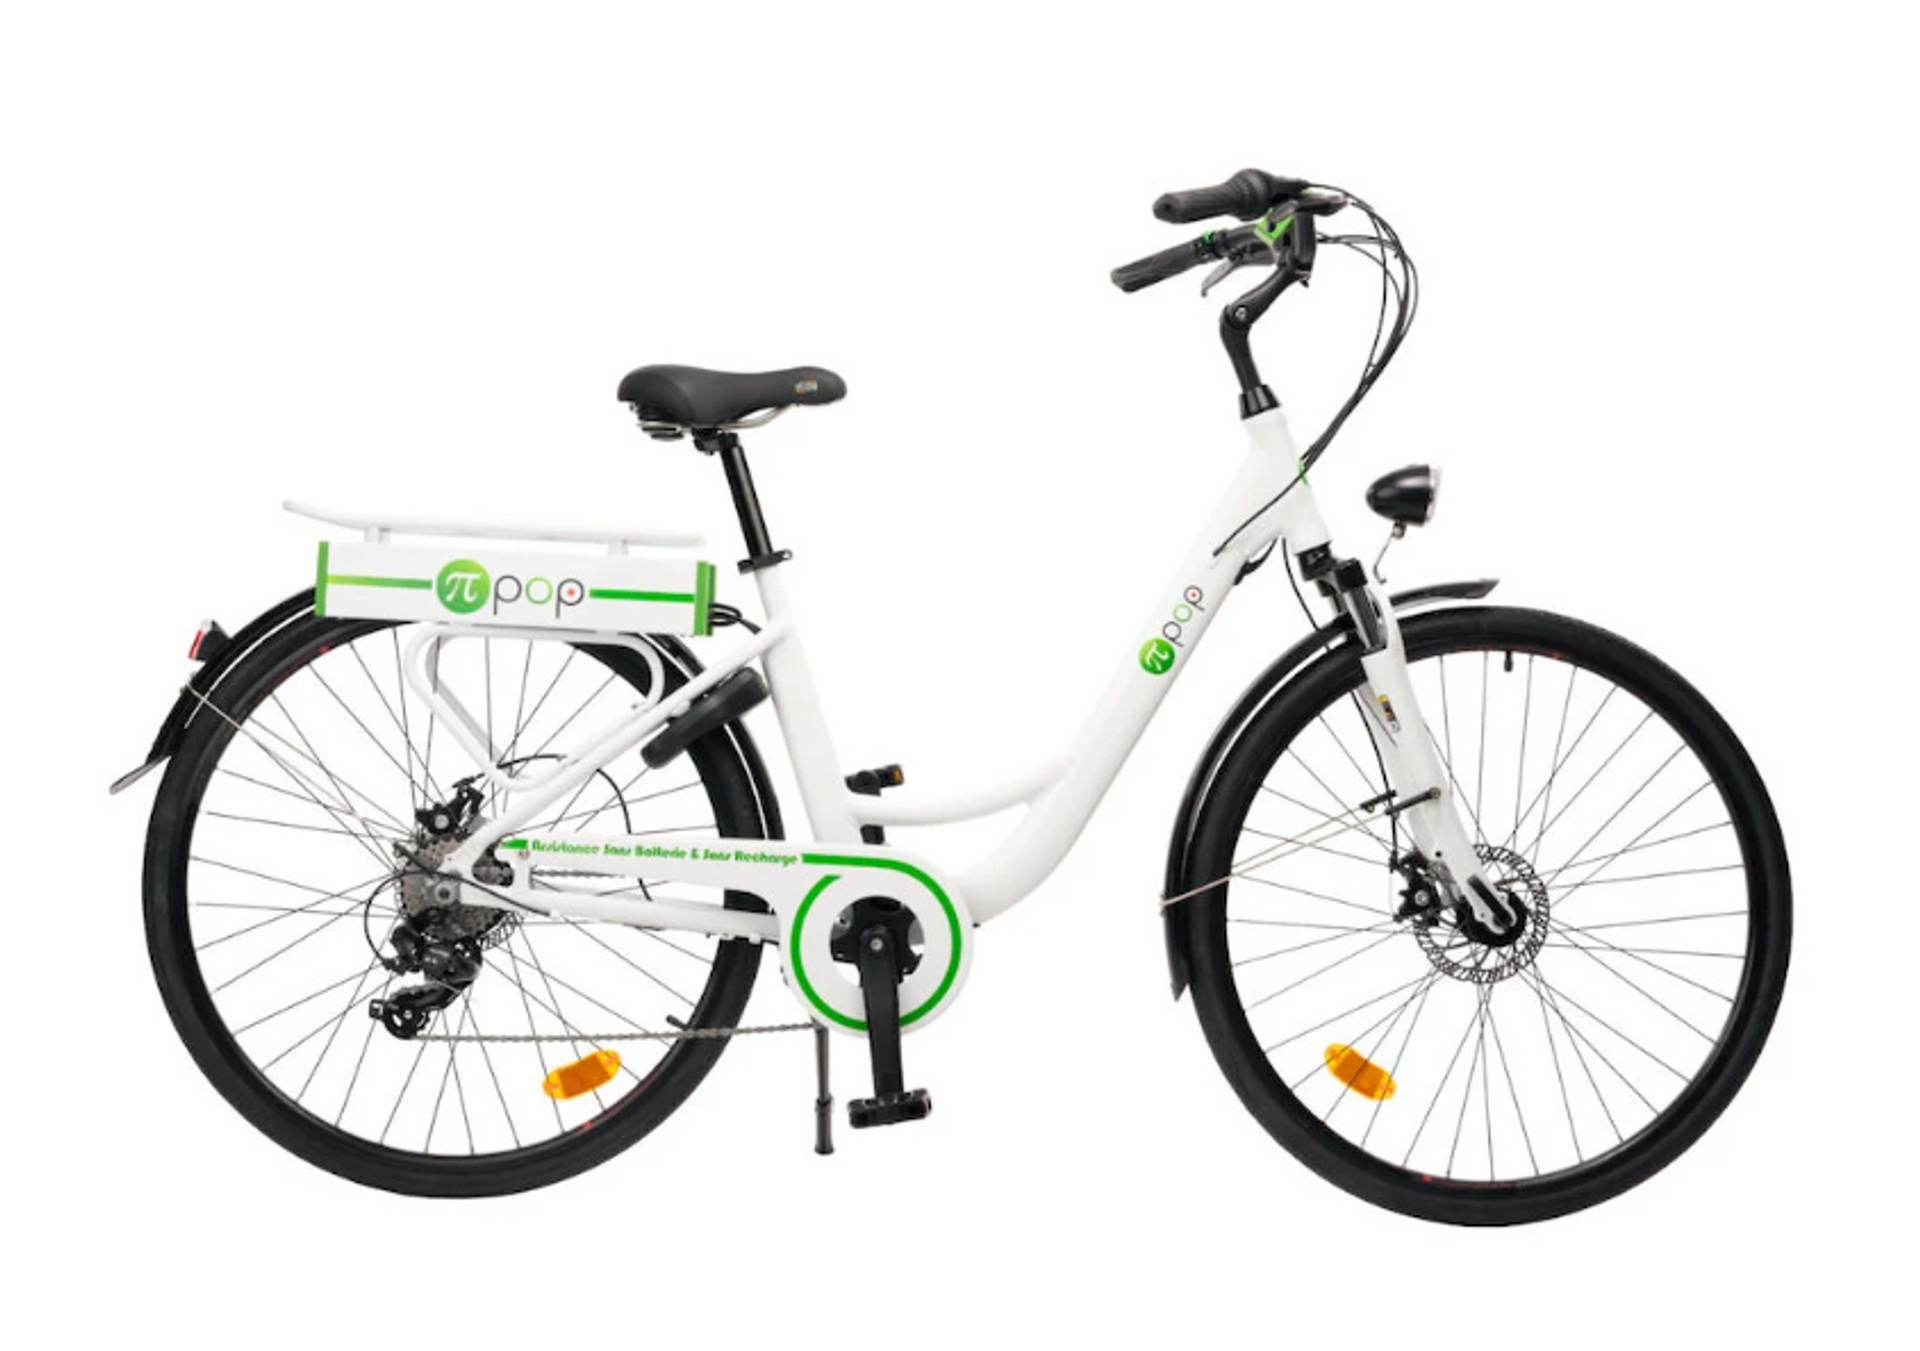 Pi-POP offers French cyclists a lithium-free e-bike